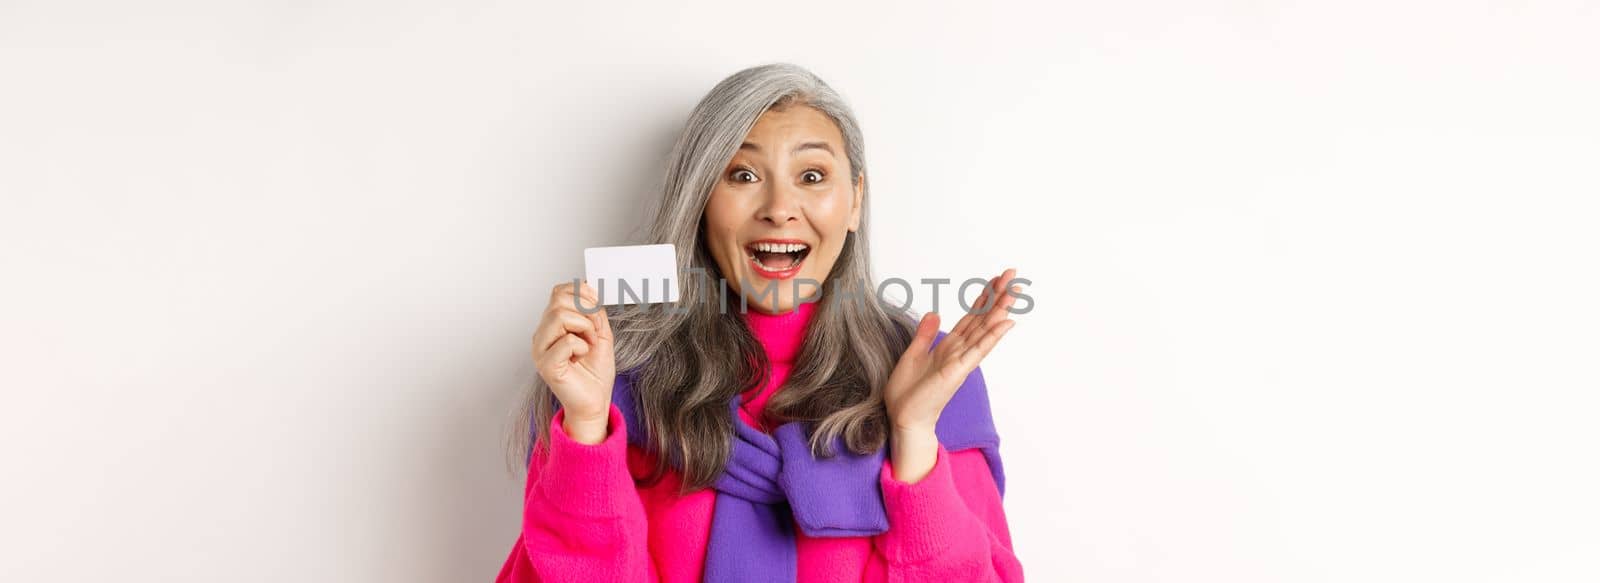 Shopping concept. Happy asian old aldy looking impressed and showing plastic credit card of her bank, standing over white background.